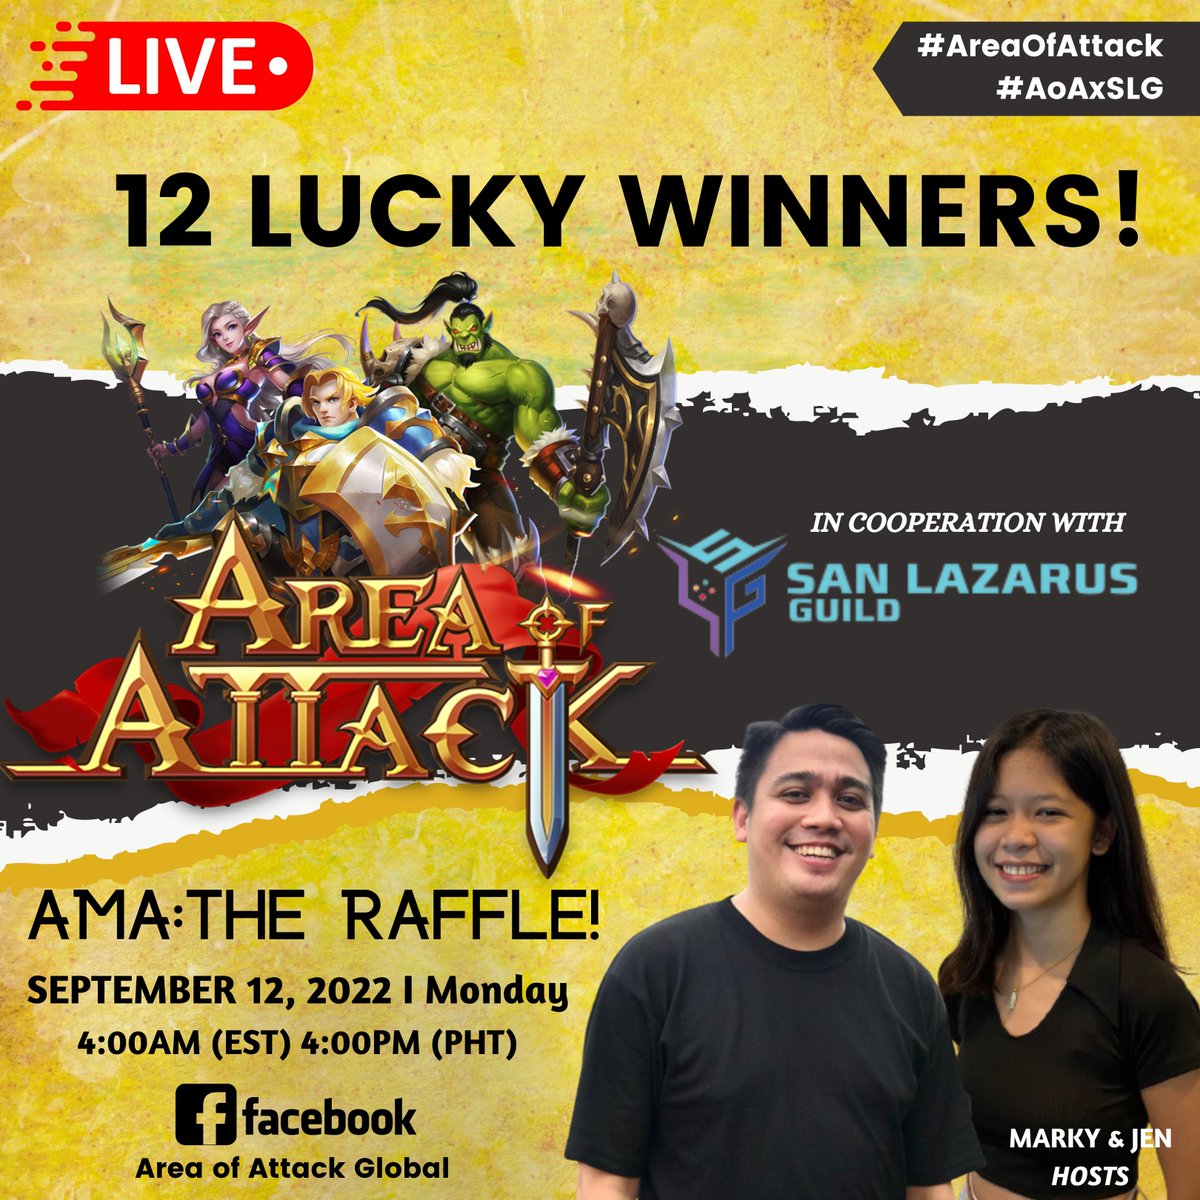 1 HOUR TO GO! ✨ Area of Attack x San Lazarus Guild's AMA: The Raffle! ✨ 12 LUCKY WINNERS of NFTs worth $300 MATIC! So make sure to tune in and be PRESENT! Hosted by Marky & Jen @themgorenseph @ljsaints_ 📅 September 12, 2022 I Monday ⏰ 4:00am EST I 4:00pm PHT